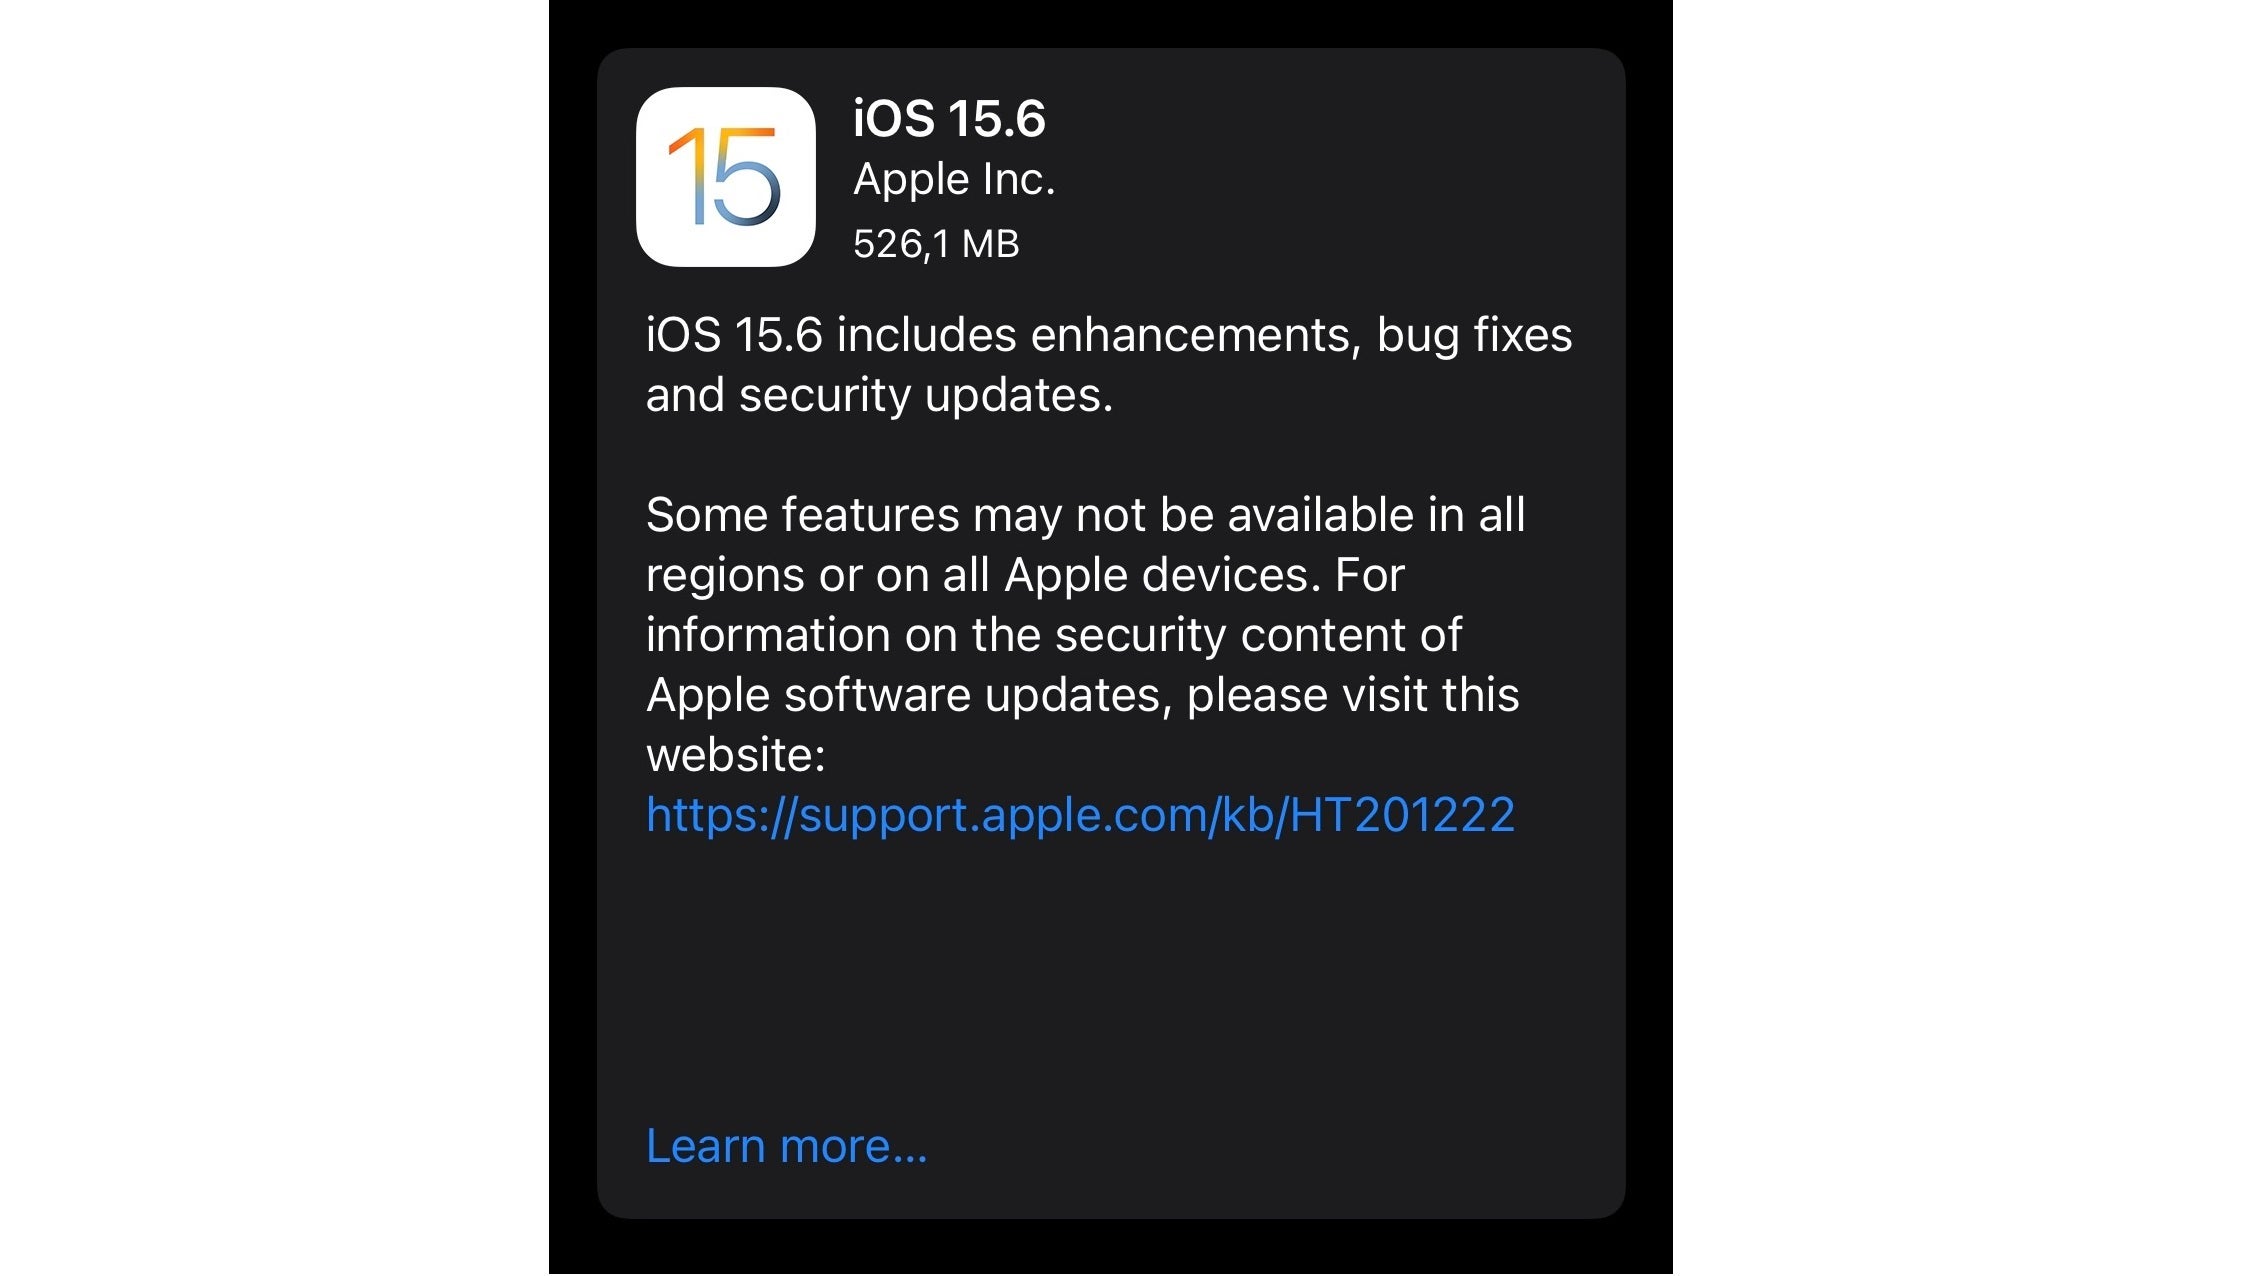 Apple releases iOS 15.6 and iPadOS 15.6, possibly the last versions before iOS and iPadOS 16